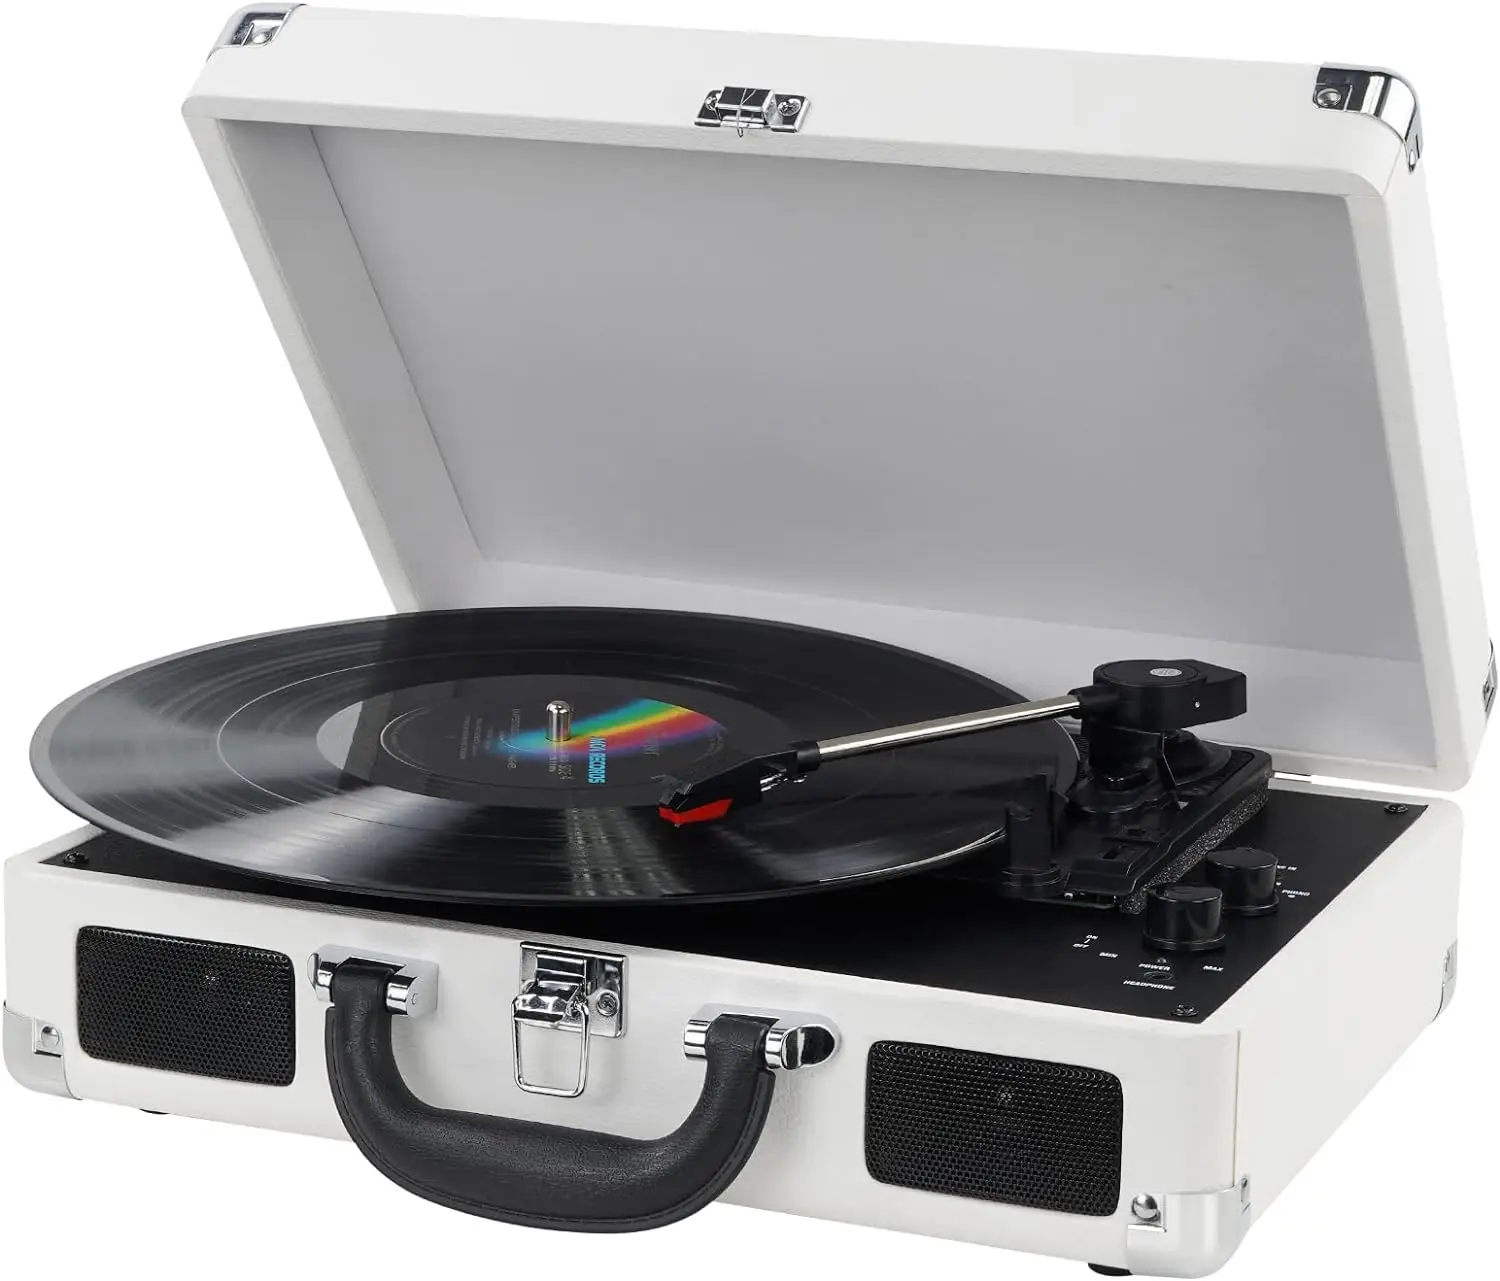 

Vinyl Record Wireless Turntable Bluetooth 3-Speed Portable Vintage Suitcase with -in Speakers, Includes Extra Stylus, Out, AUX